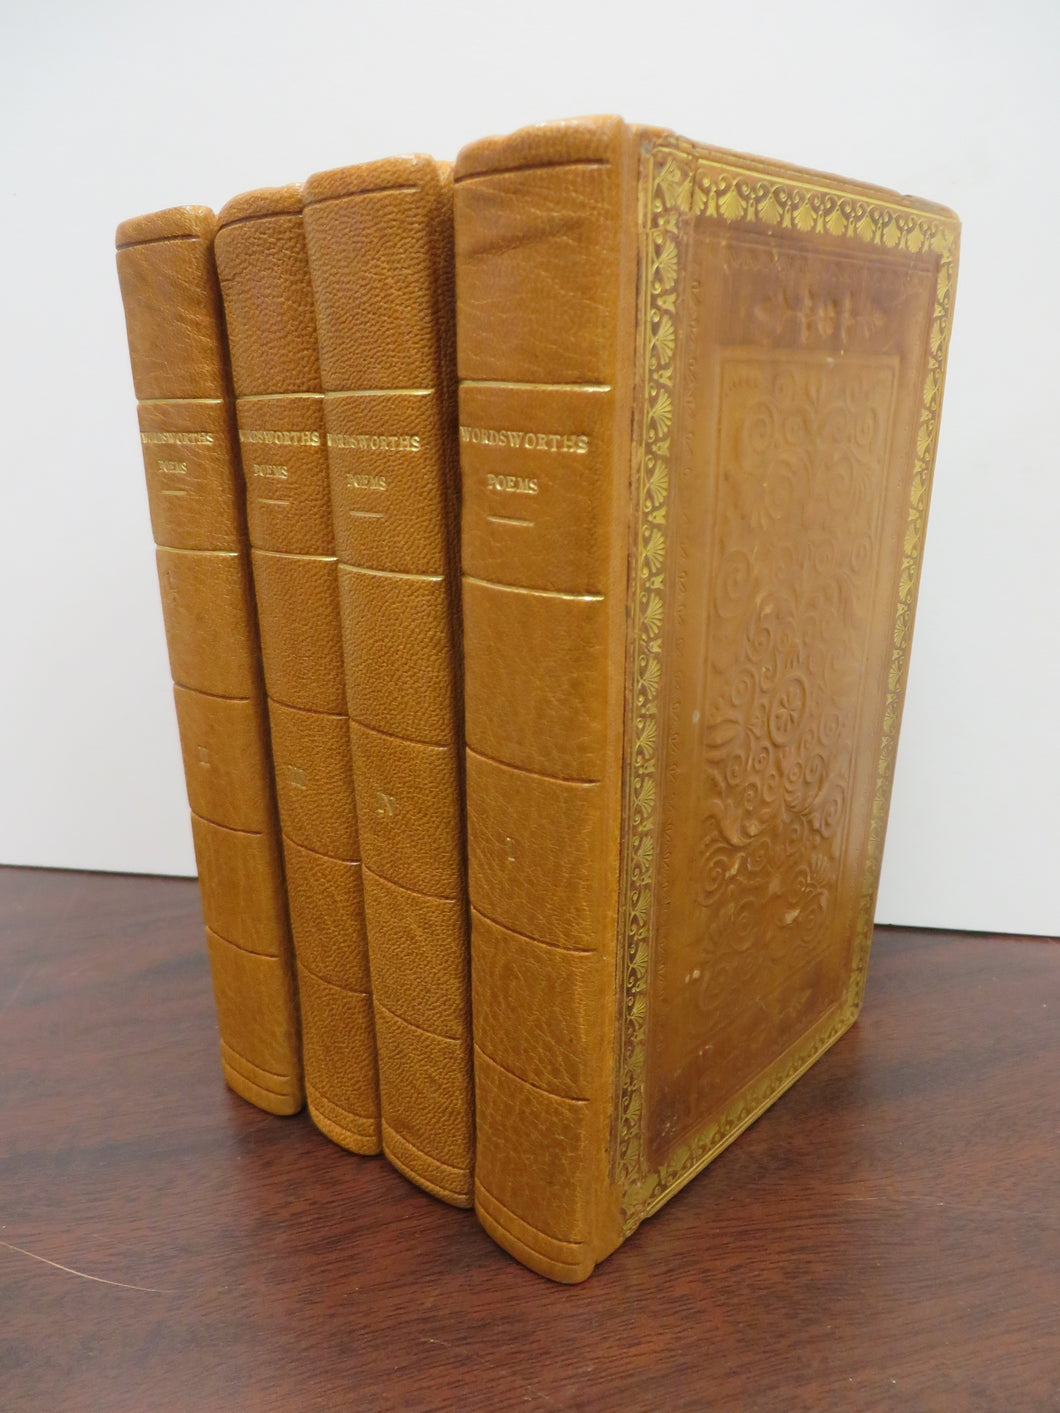 The Miscellaneous Poems of William Wordsworth. In Four Volumes